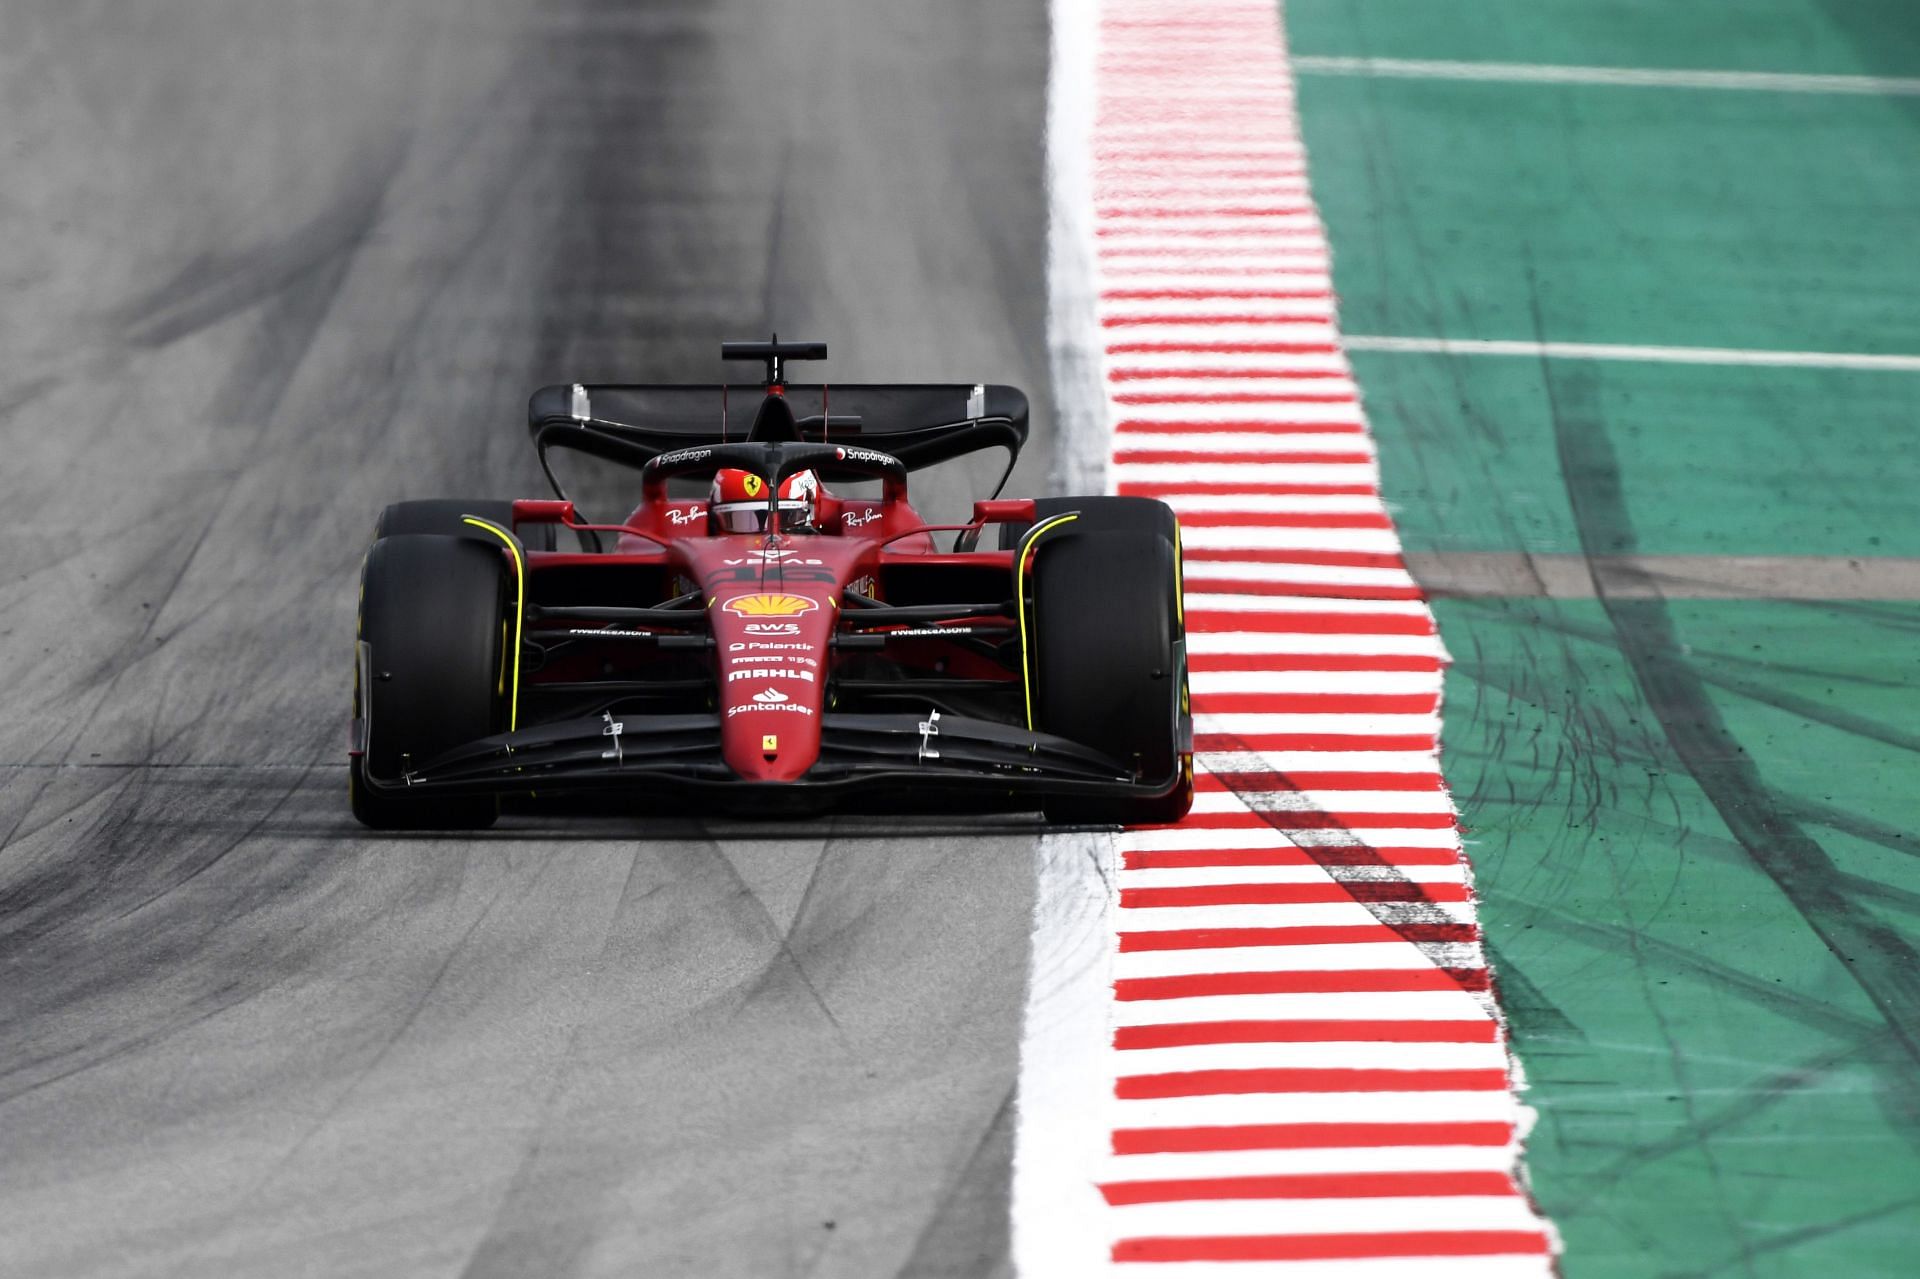 Charles Leclerc&#039;s Ferrari F1-75 takes on the straights of the F1 circuit in Barcelona (Photo by Rudy Carezzevoli/Getty Images)